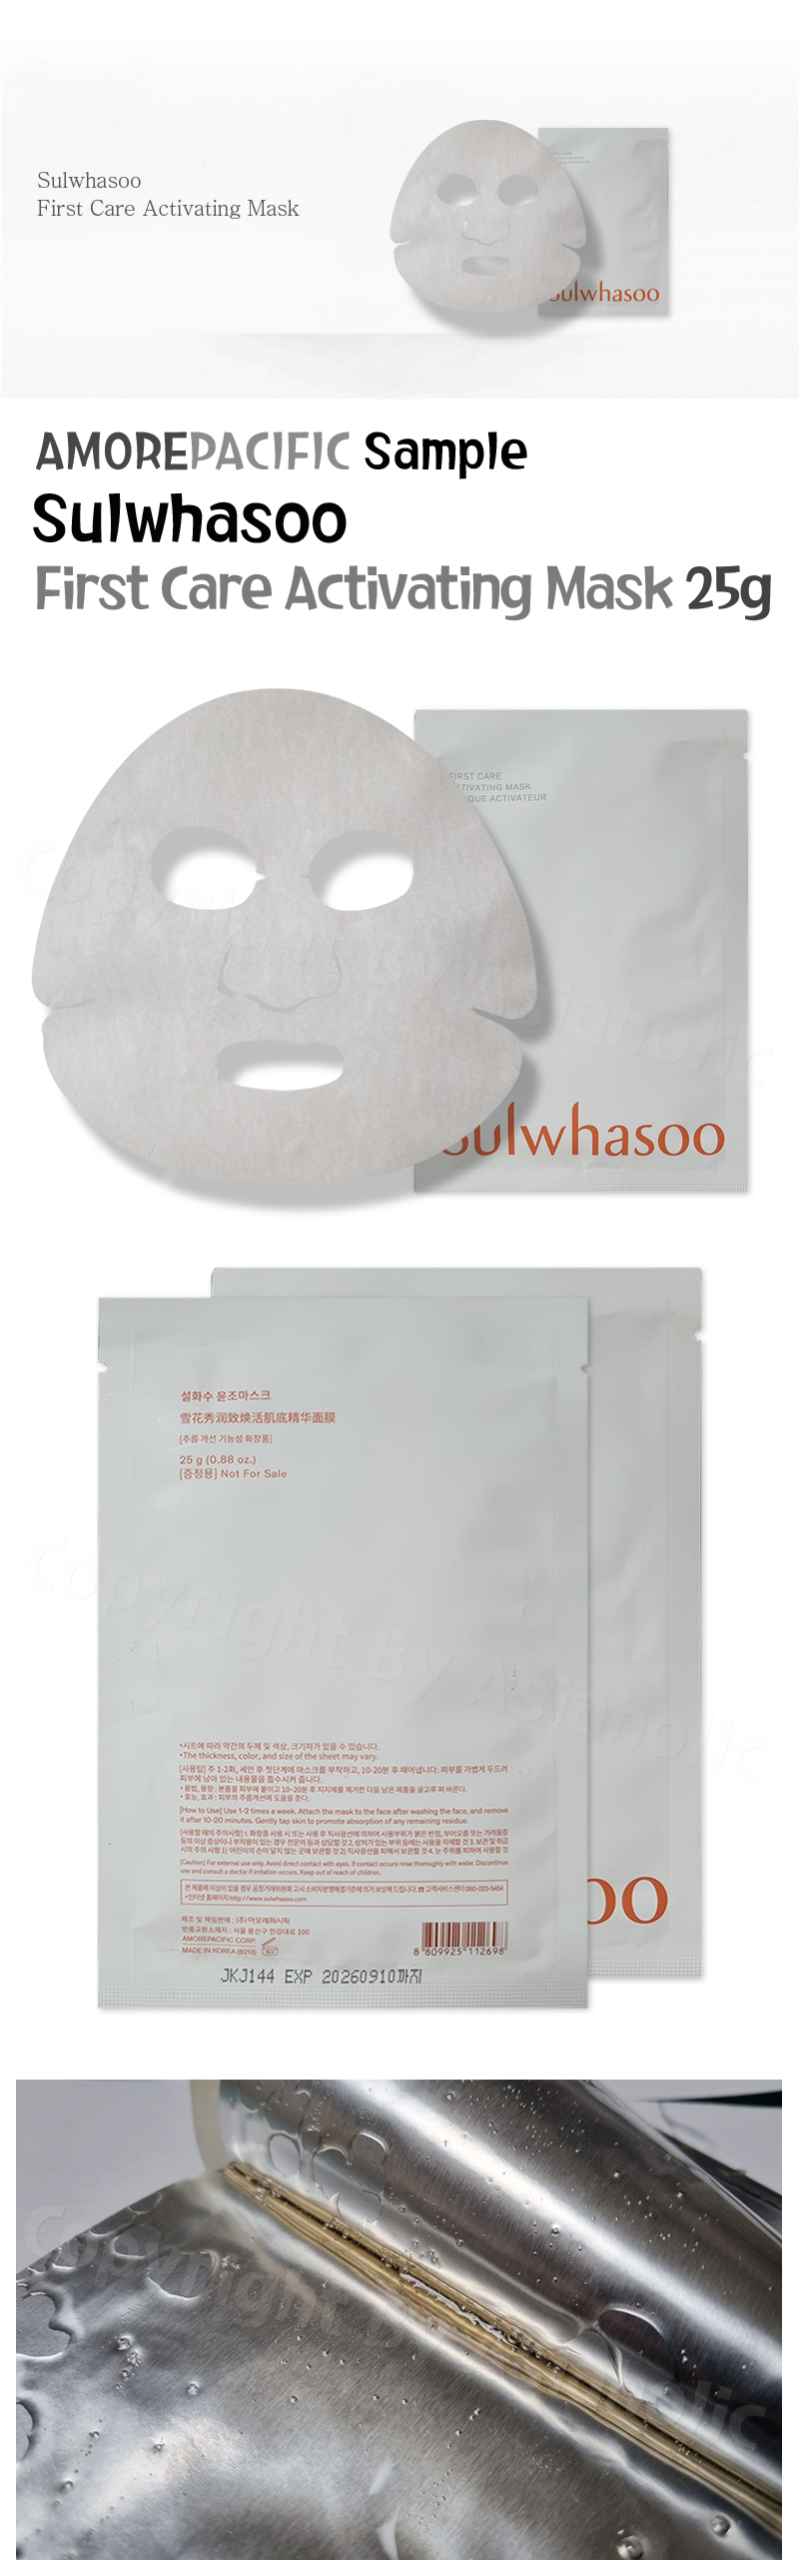 Sulwhasoo First Care Activating Mask 25g x 2pcs Anti aging Mask Newest Version